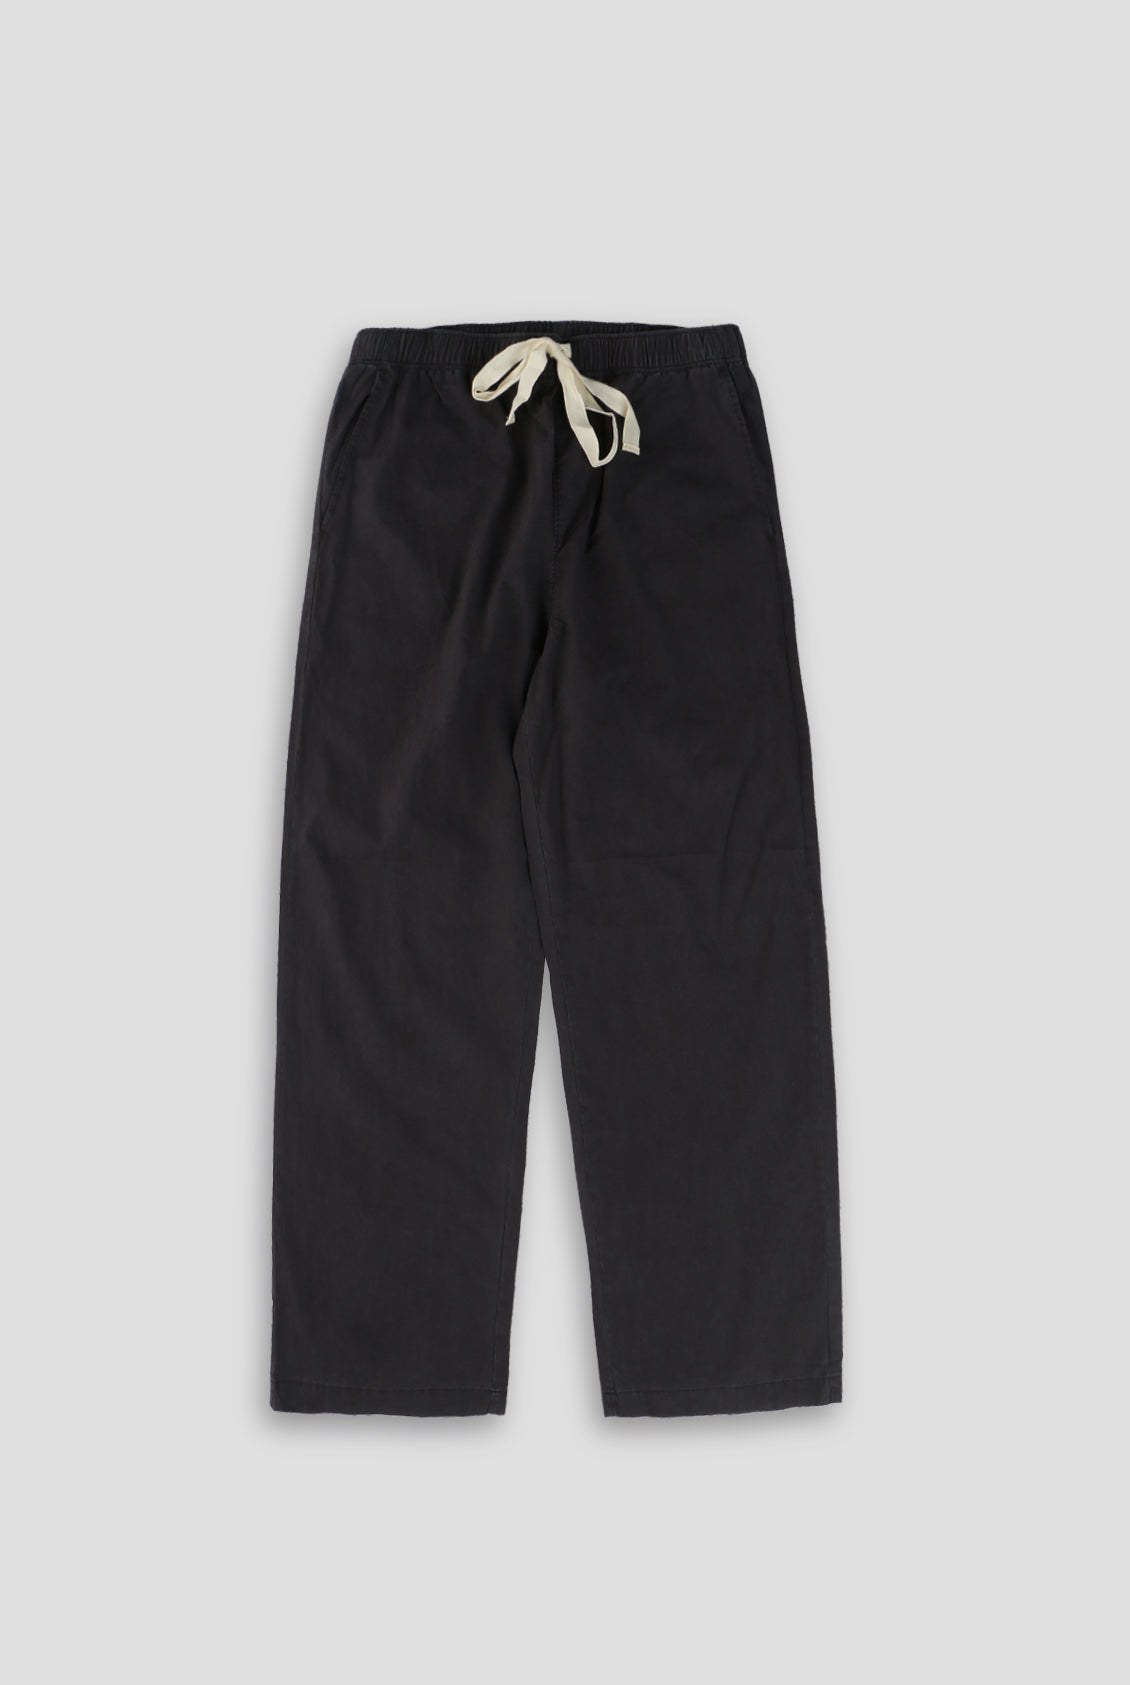 G1 Goods Vacation Pants in Washed Black